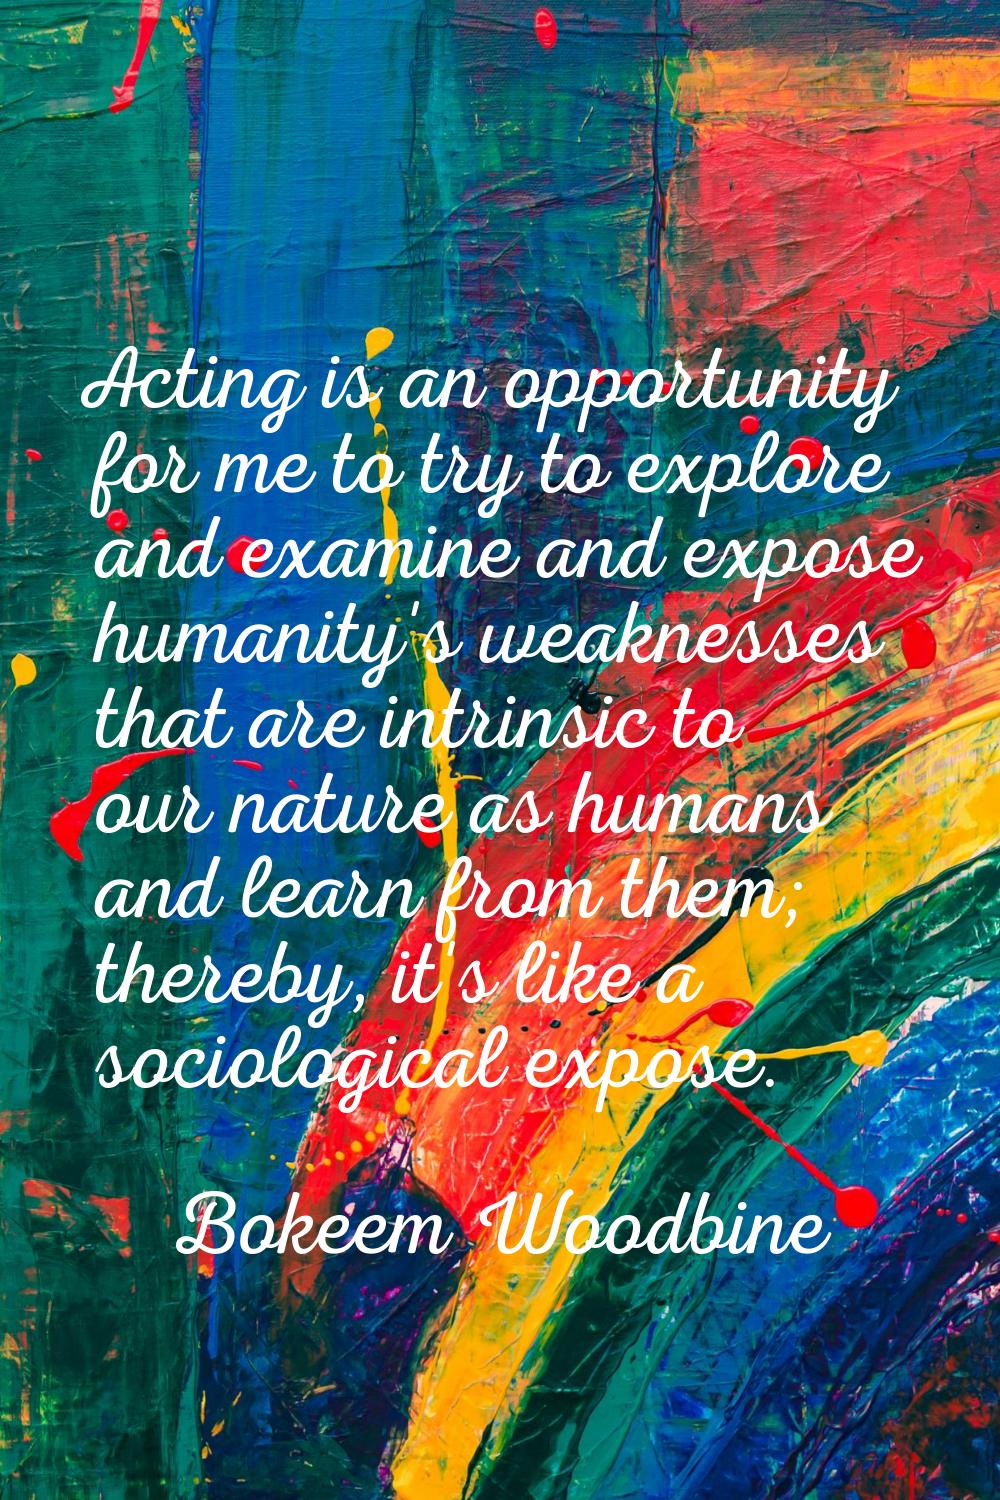 Acting is an opportunity for me to try to explore and examine and expose humanity's weaknesses that